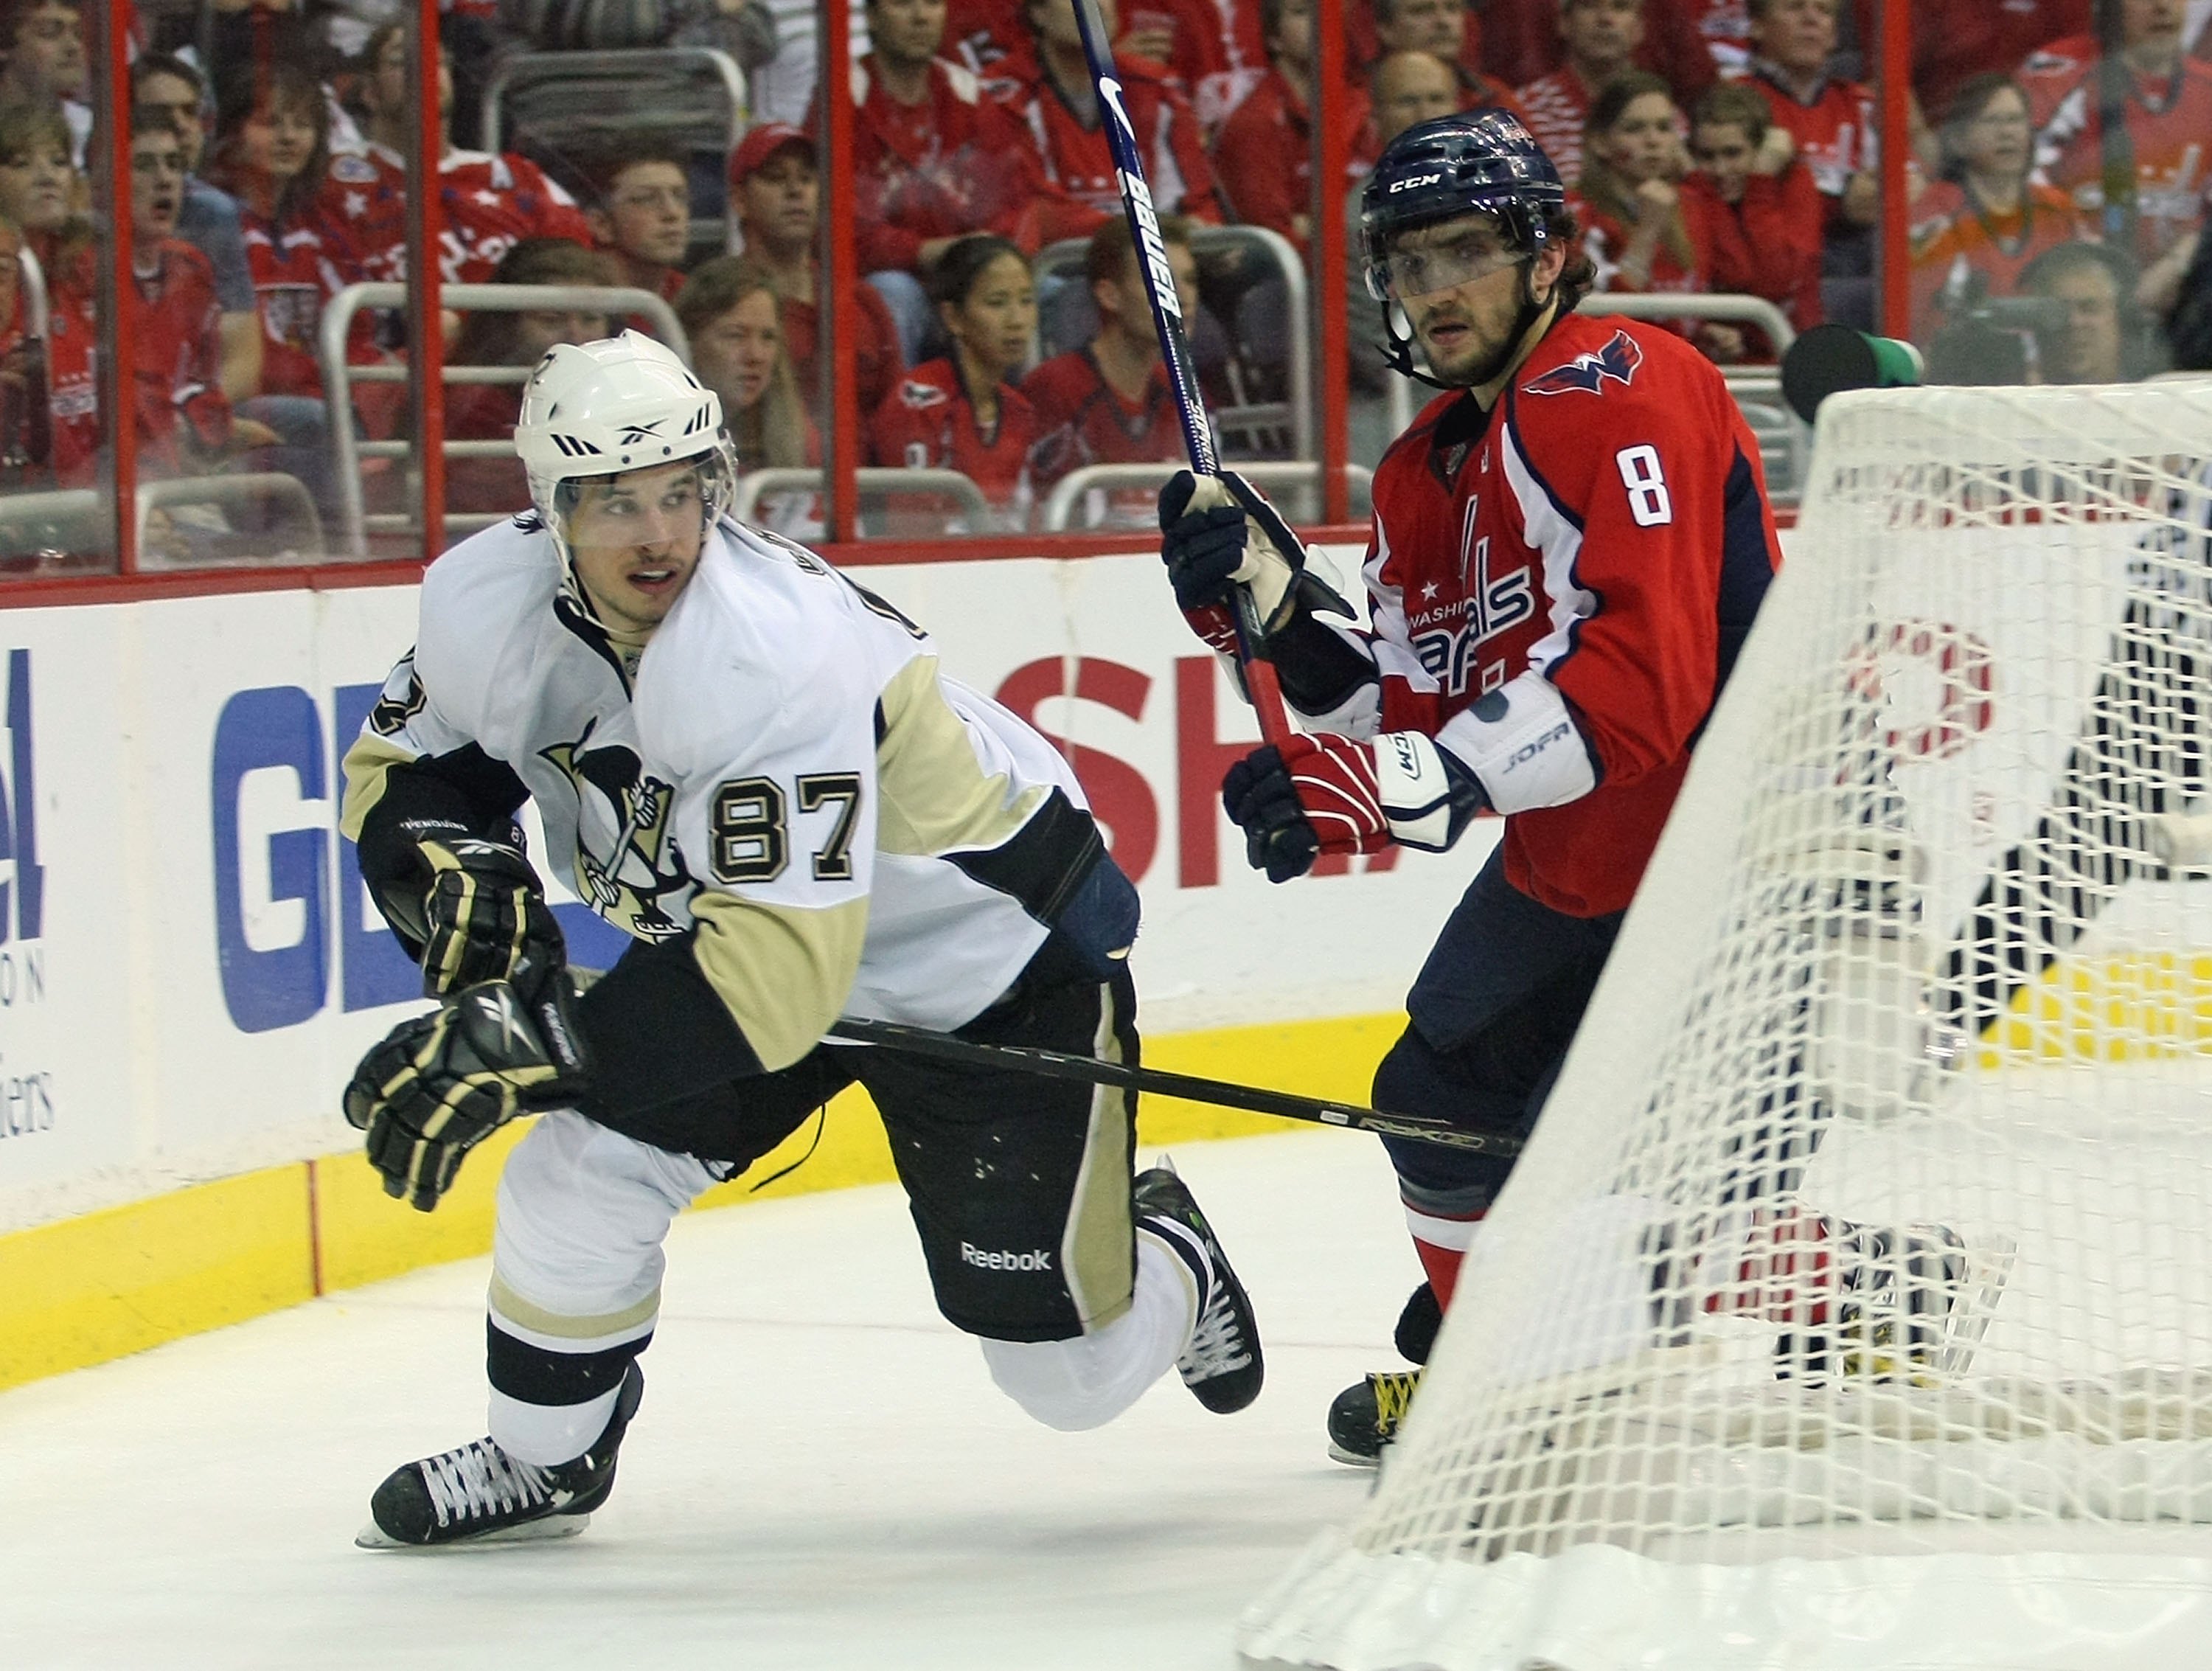 Sidney Crosby Vs. Alexander Ovechkin Why The Debate Is Over, At Least